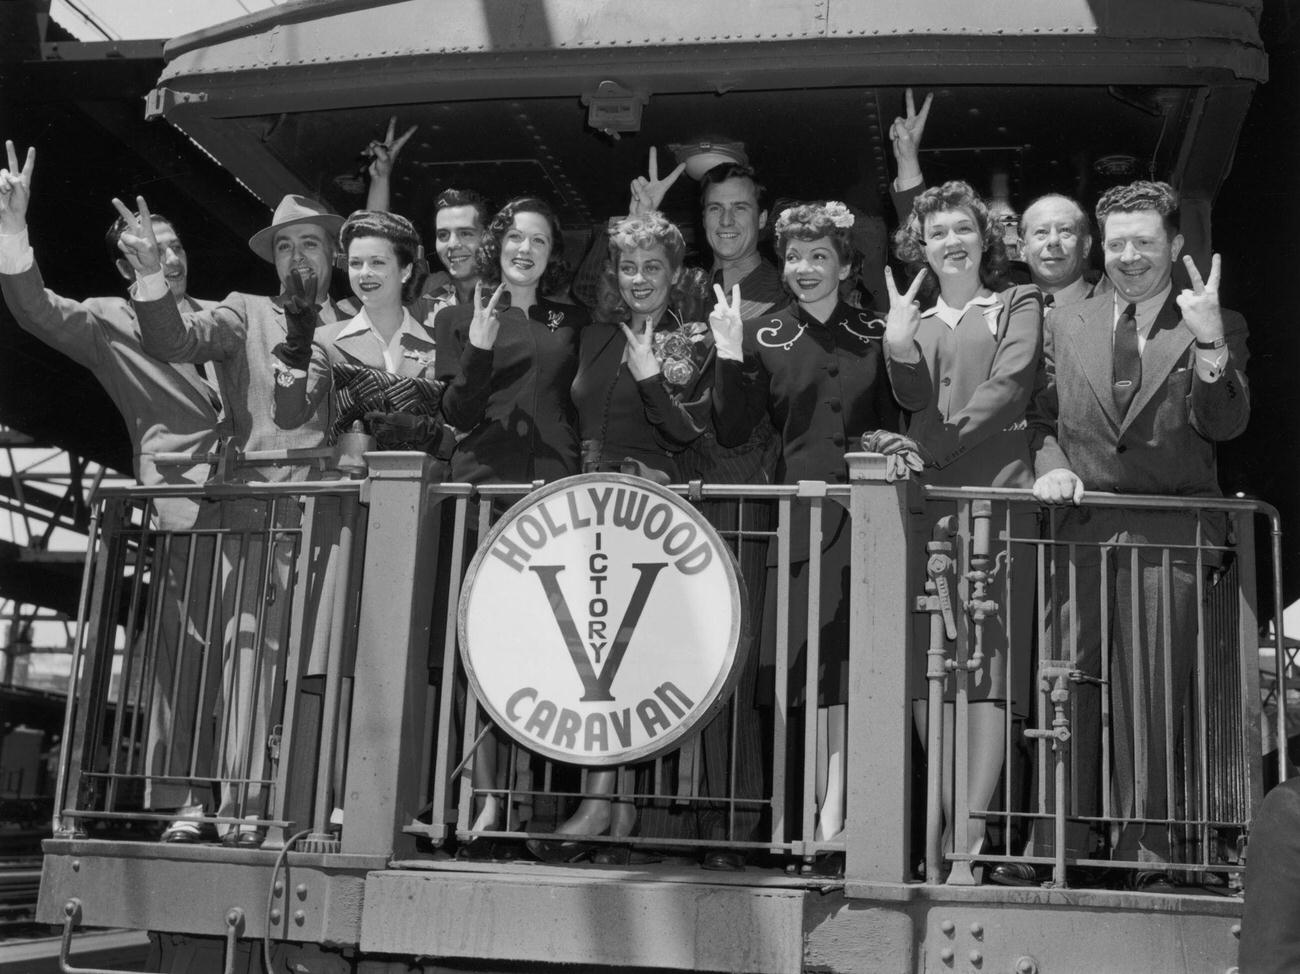 Members of the Hollywood Victory Caravan make a 'V' for 'Victory' sign while standing at the back of a railroad car.